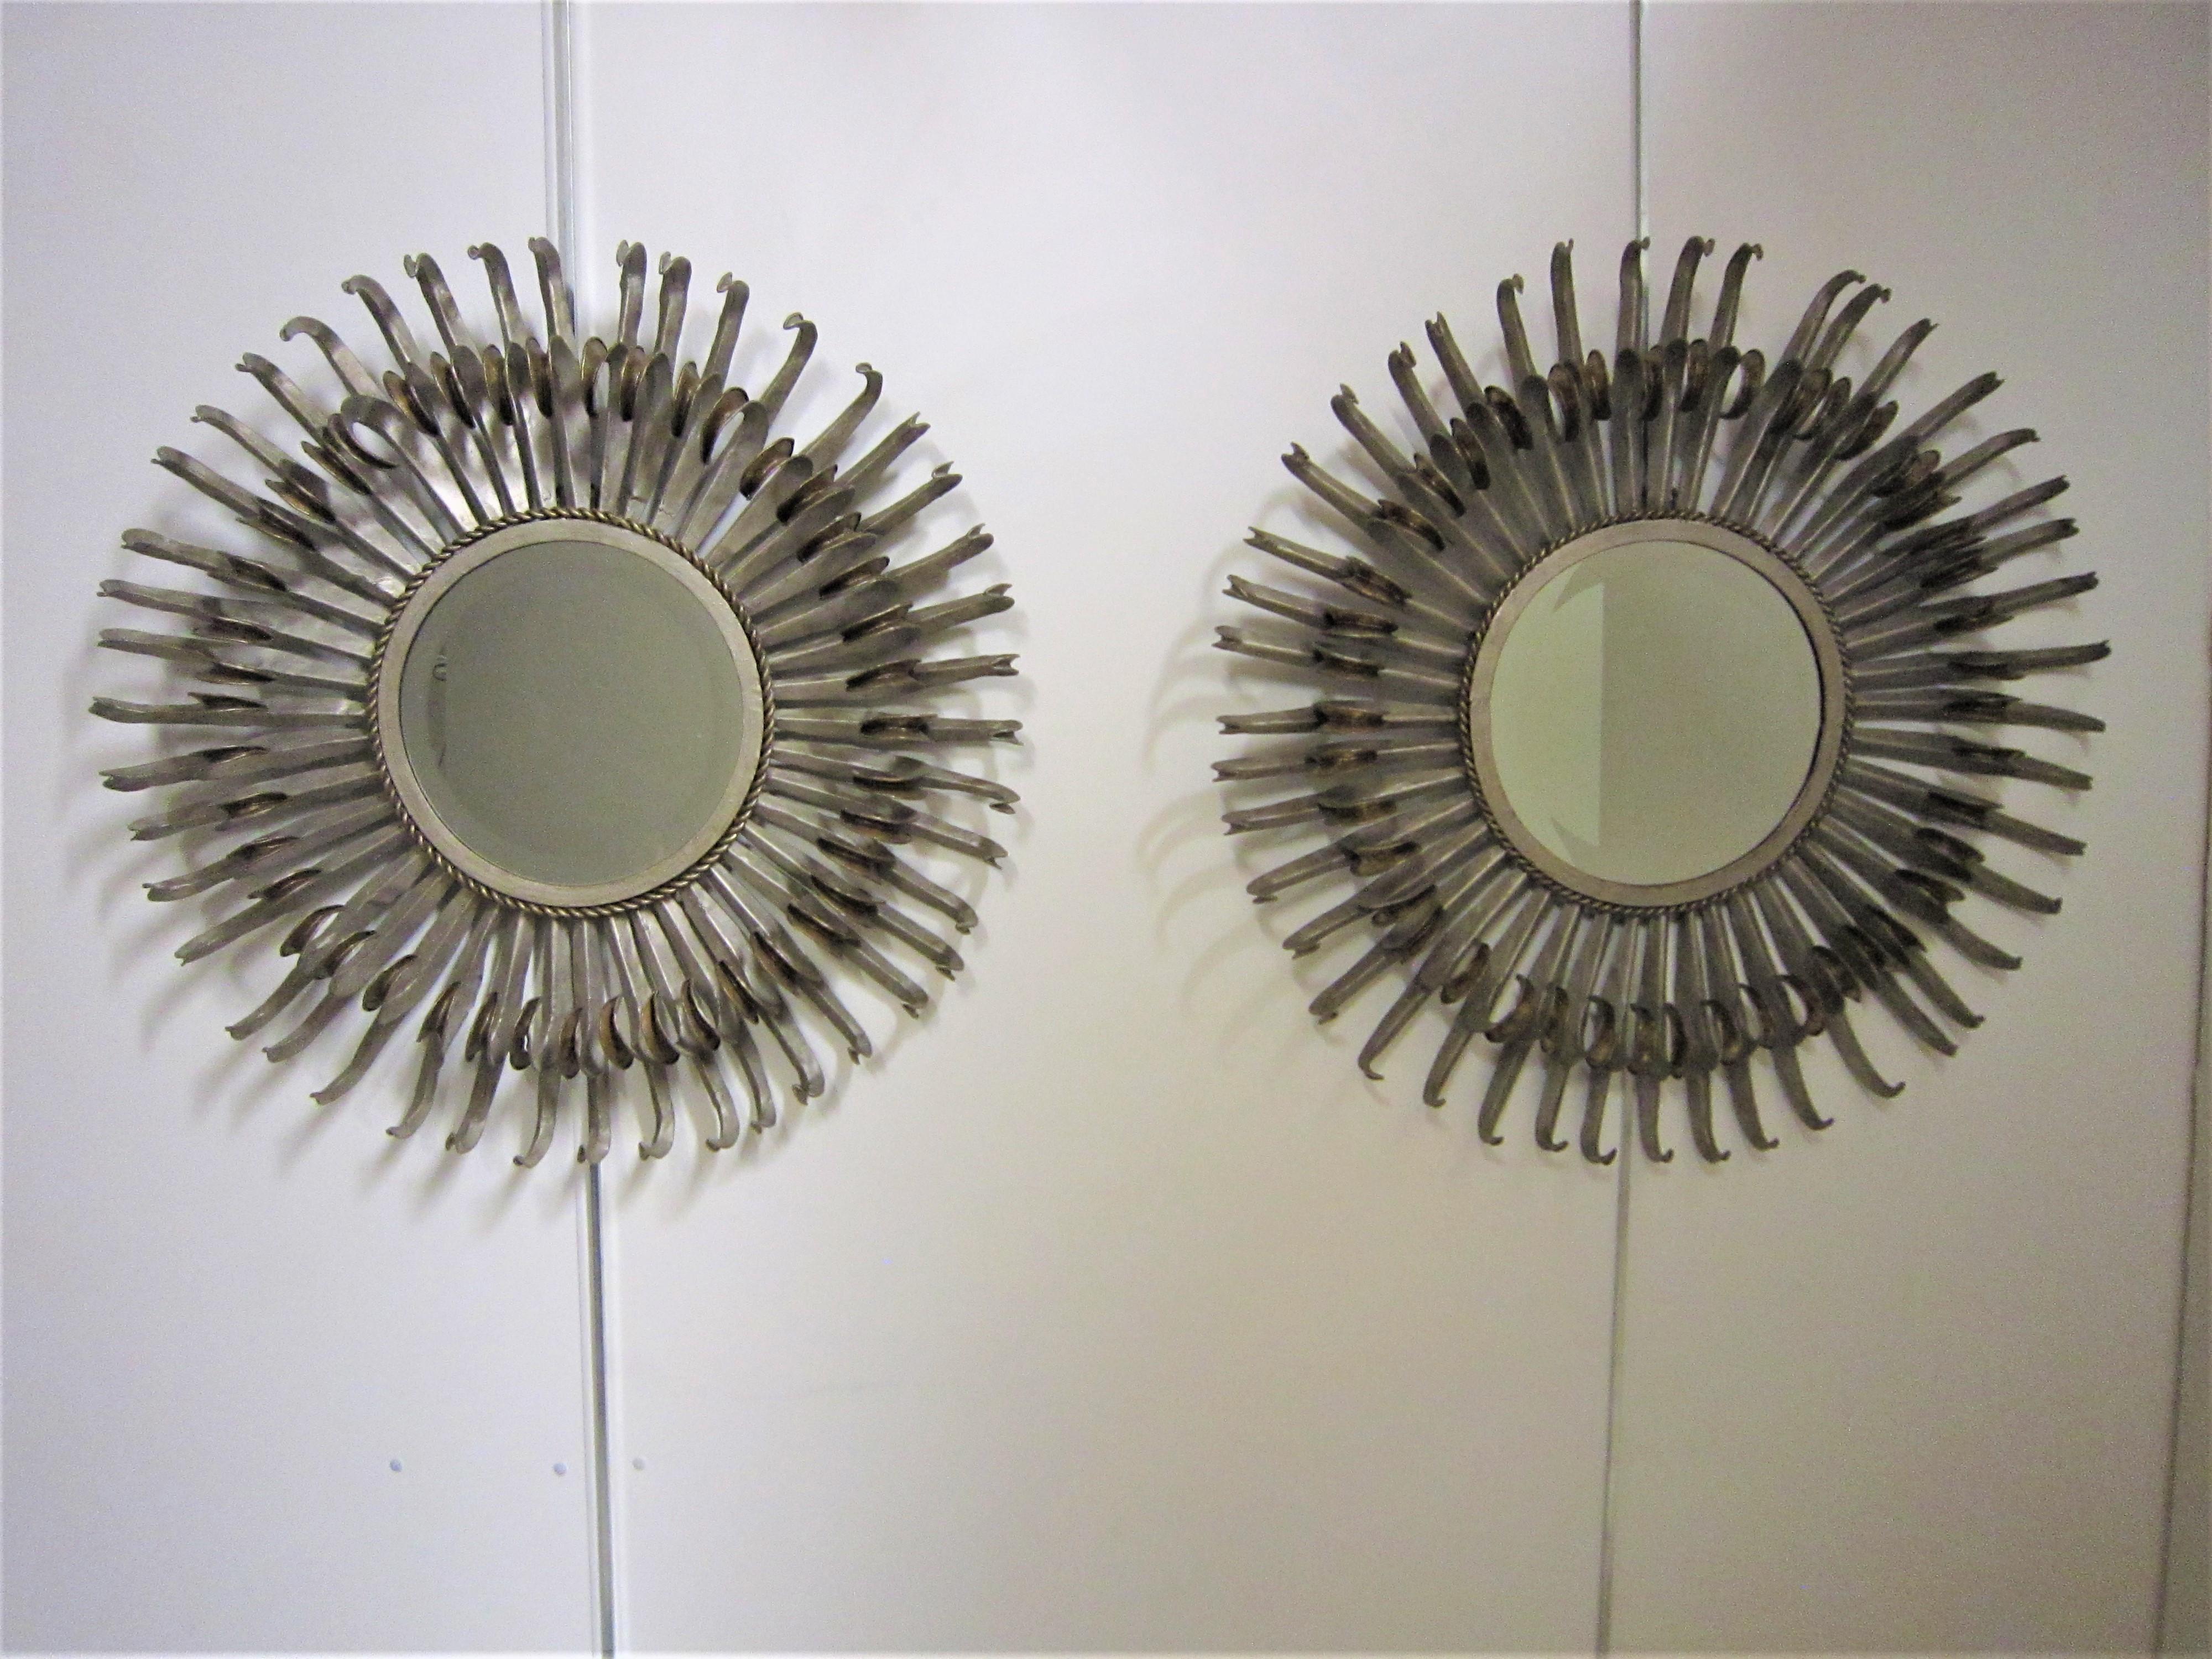 Pair of Midcentury Sunburst / Soleil Mirrors, Silver with Golden Bronze Accents For Sale 5